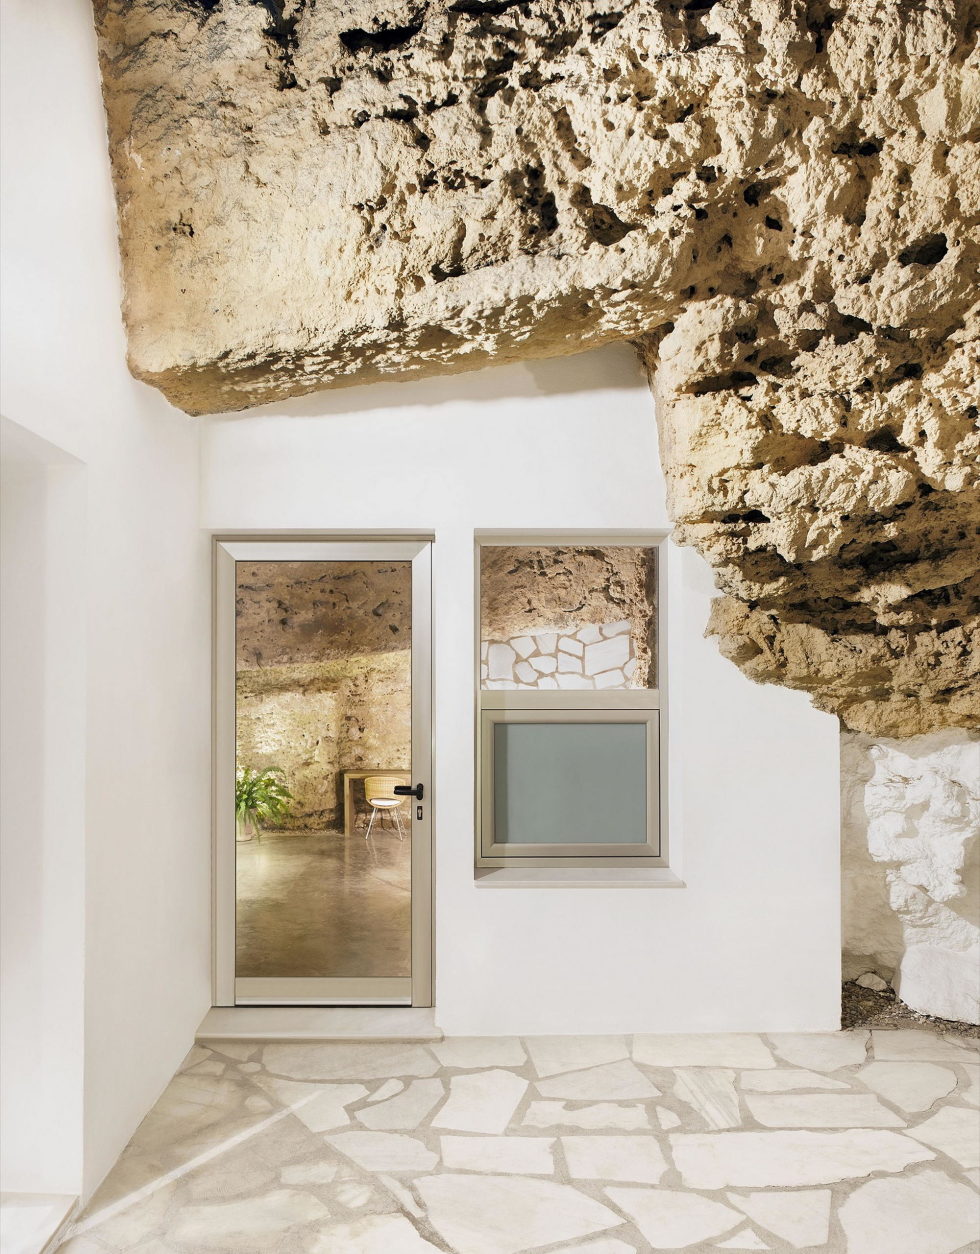 House Cave The Unusual Residence in Spain 4